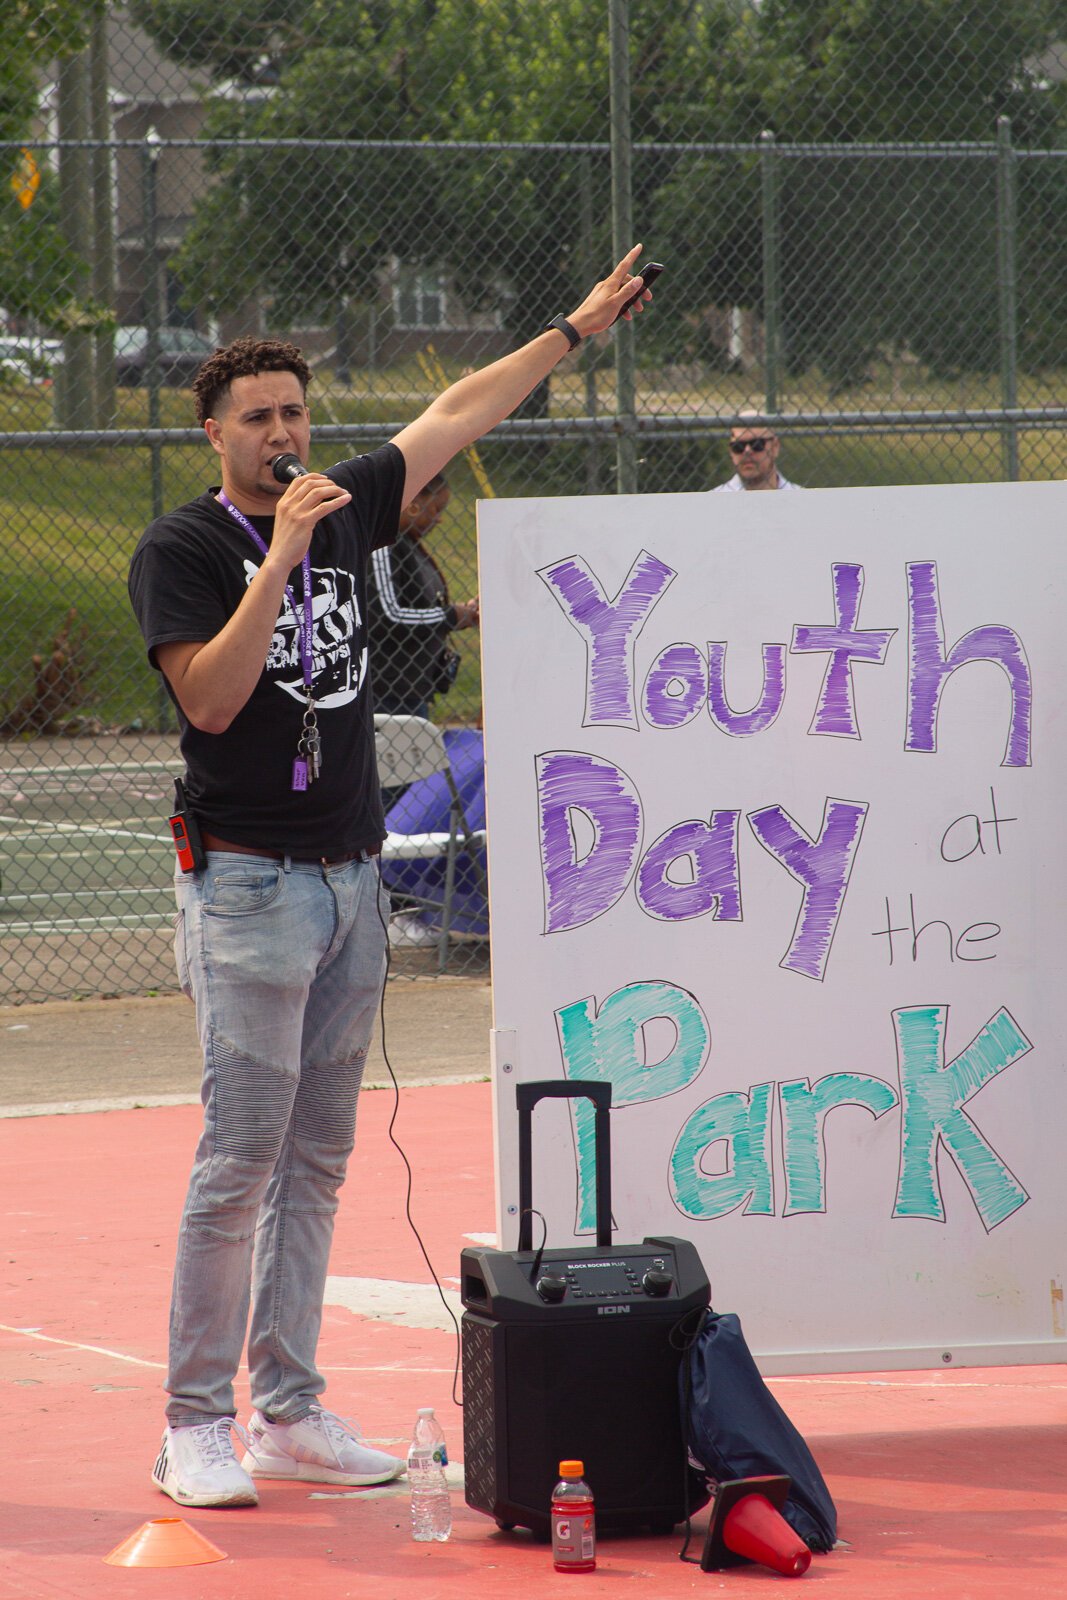 Ozone House Youth Day at the Park event.